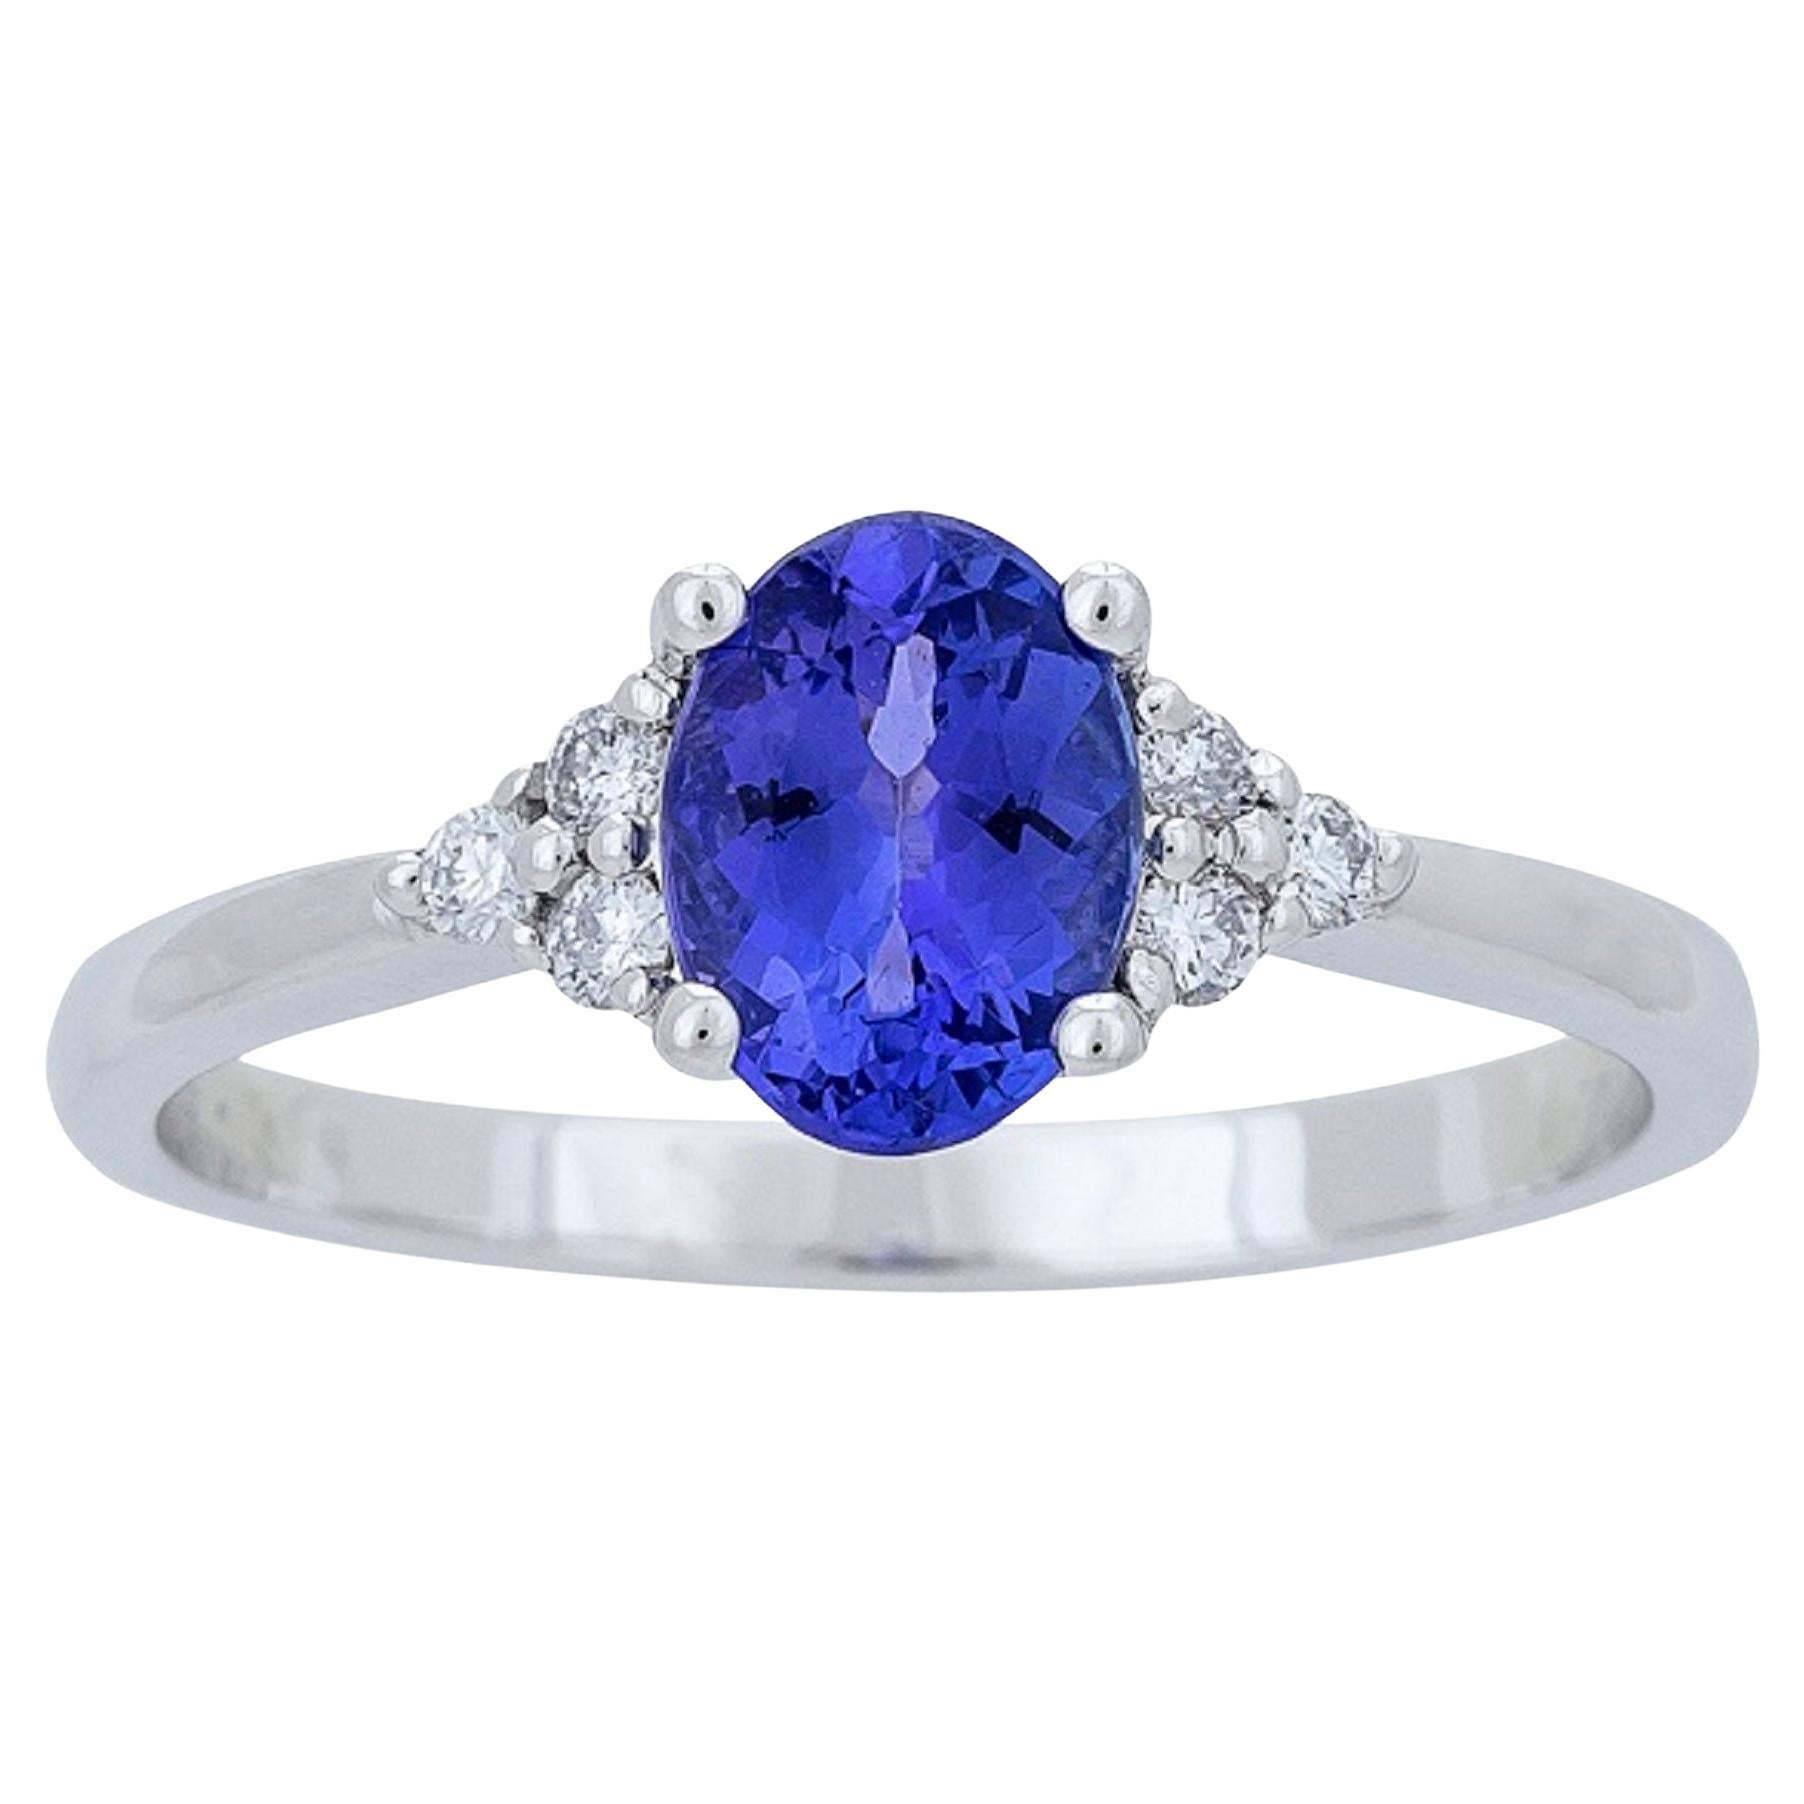 1.02 Carat Oval Cut Tanzanite Diamond Accents 14K White Gold Engagement Ring For Sale